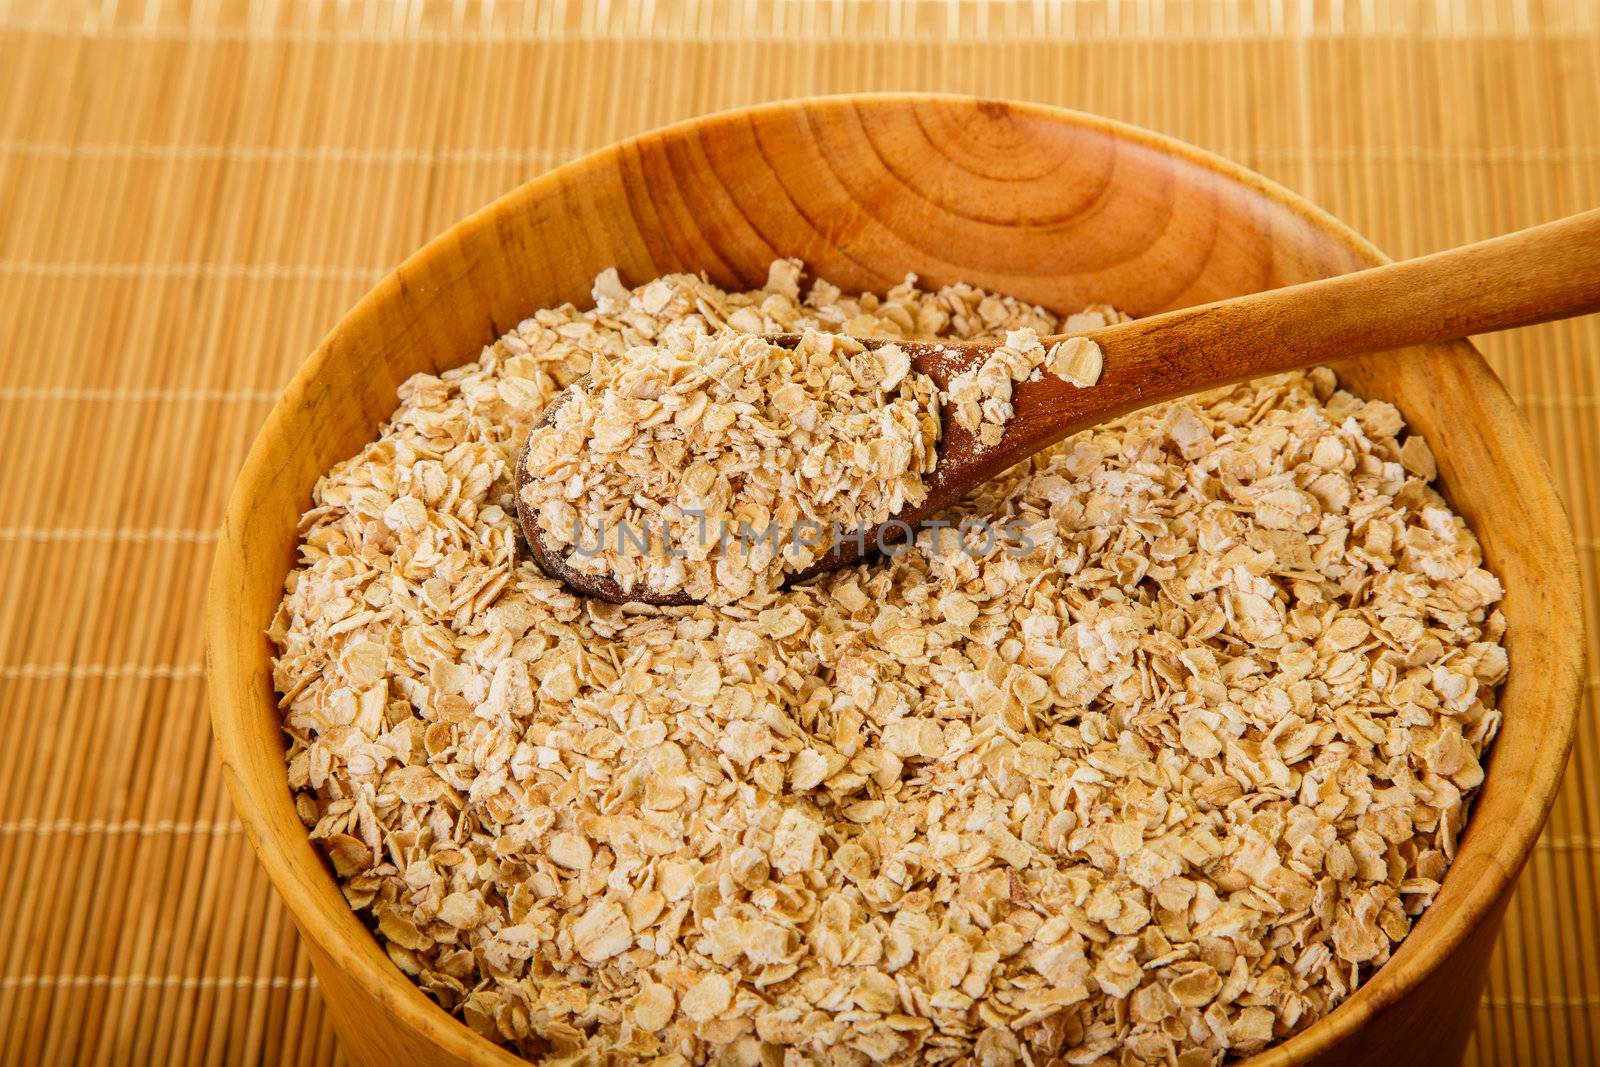 Bowl of Dried Oats in Wood Bowl by dbvirago